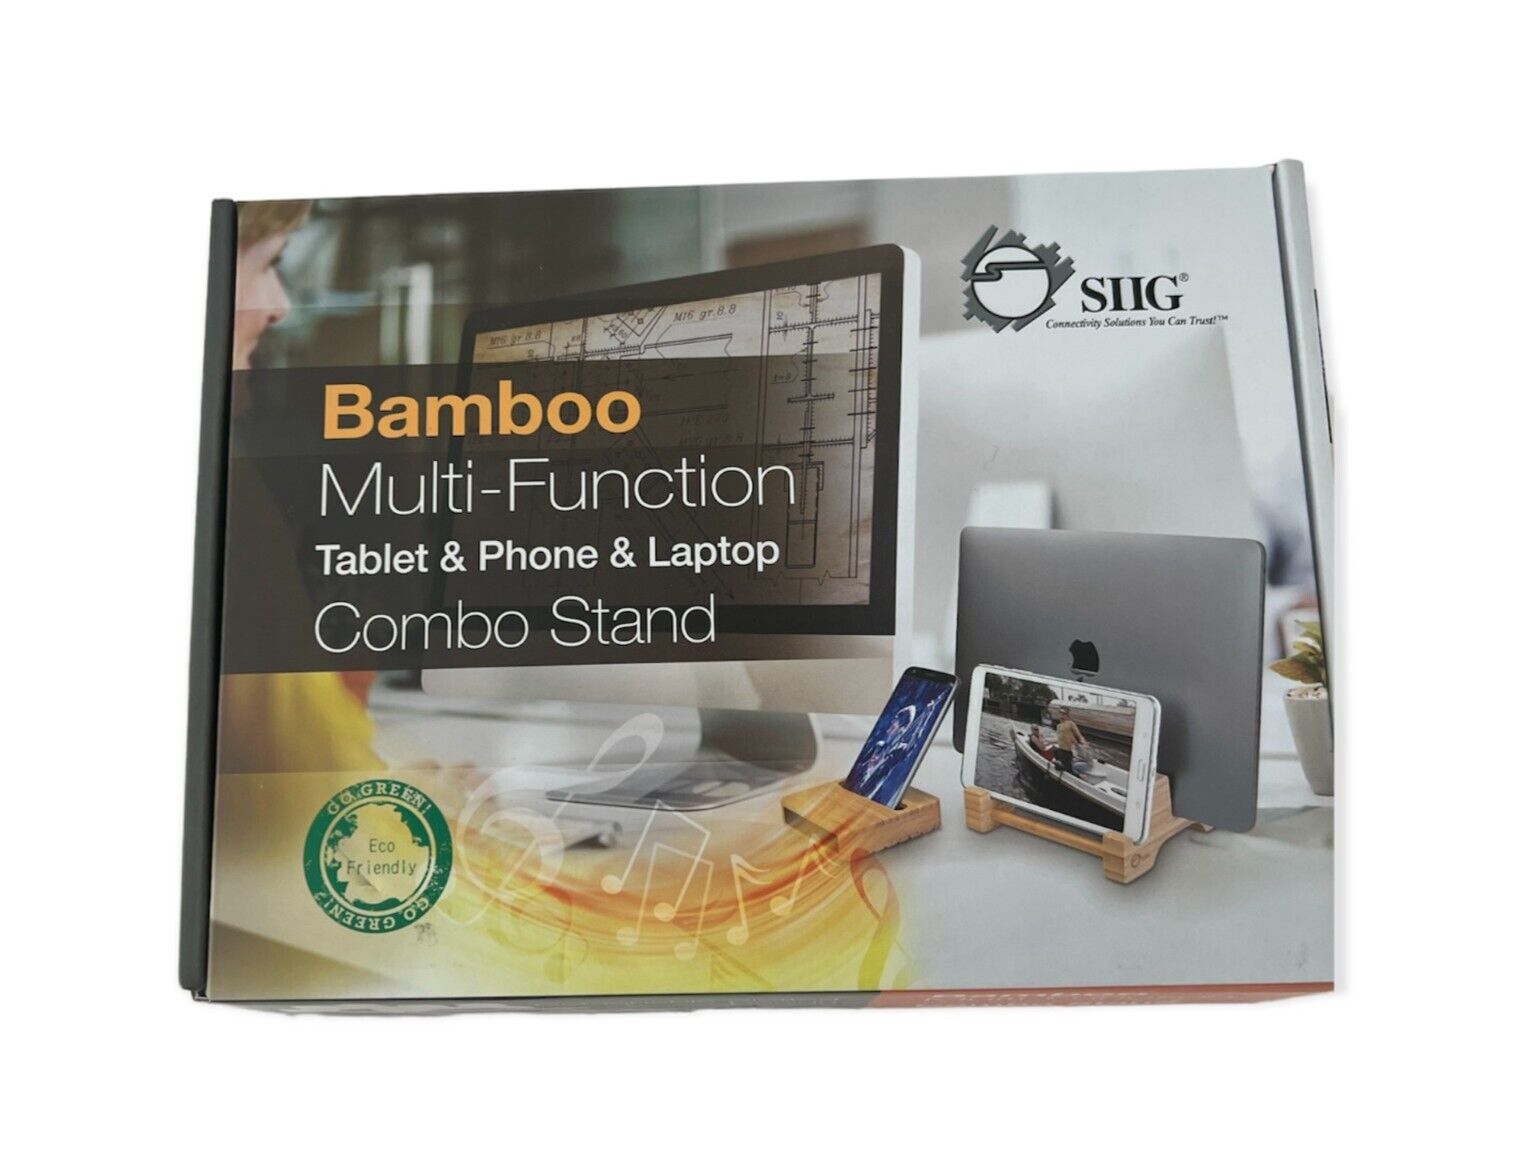 Brand New SIIG Phone & Laptop Combo Stand Bamboo Multi-function Tablet & 